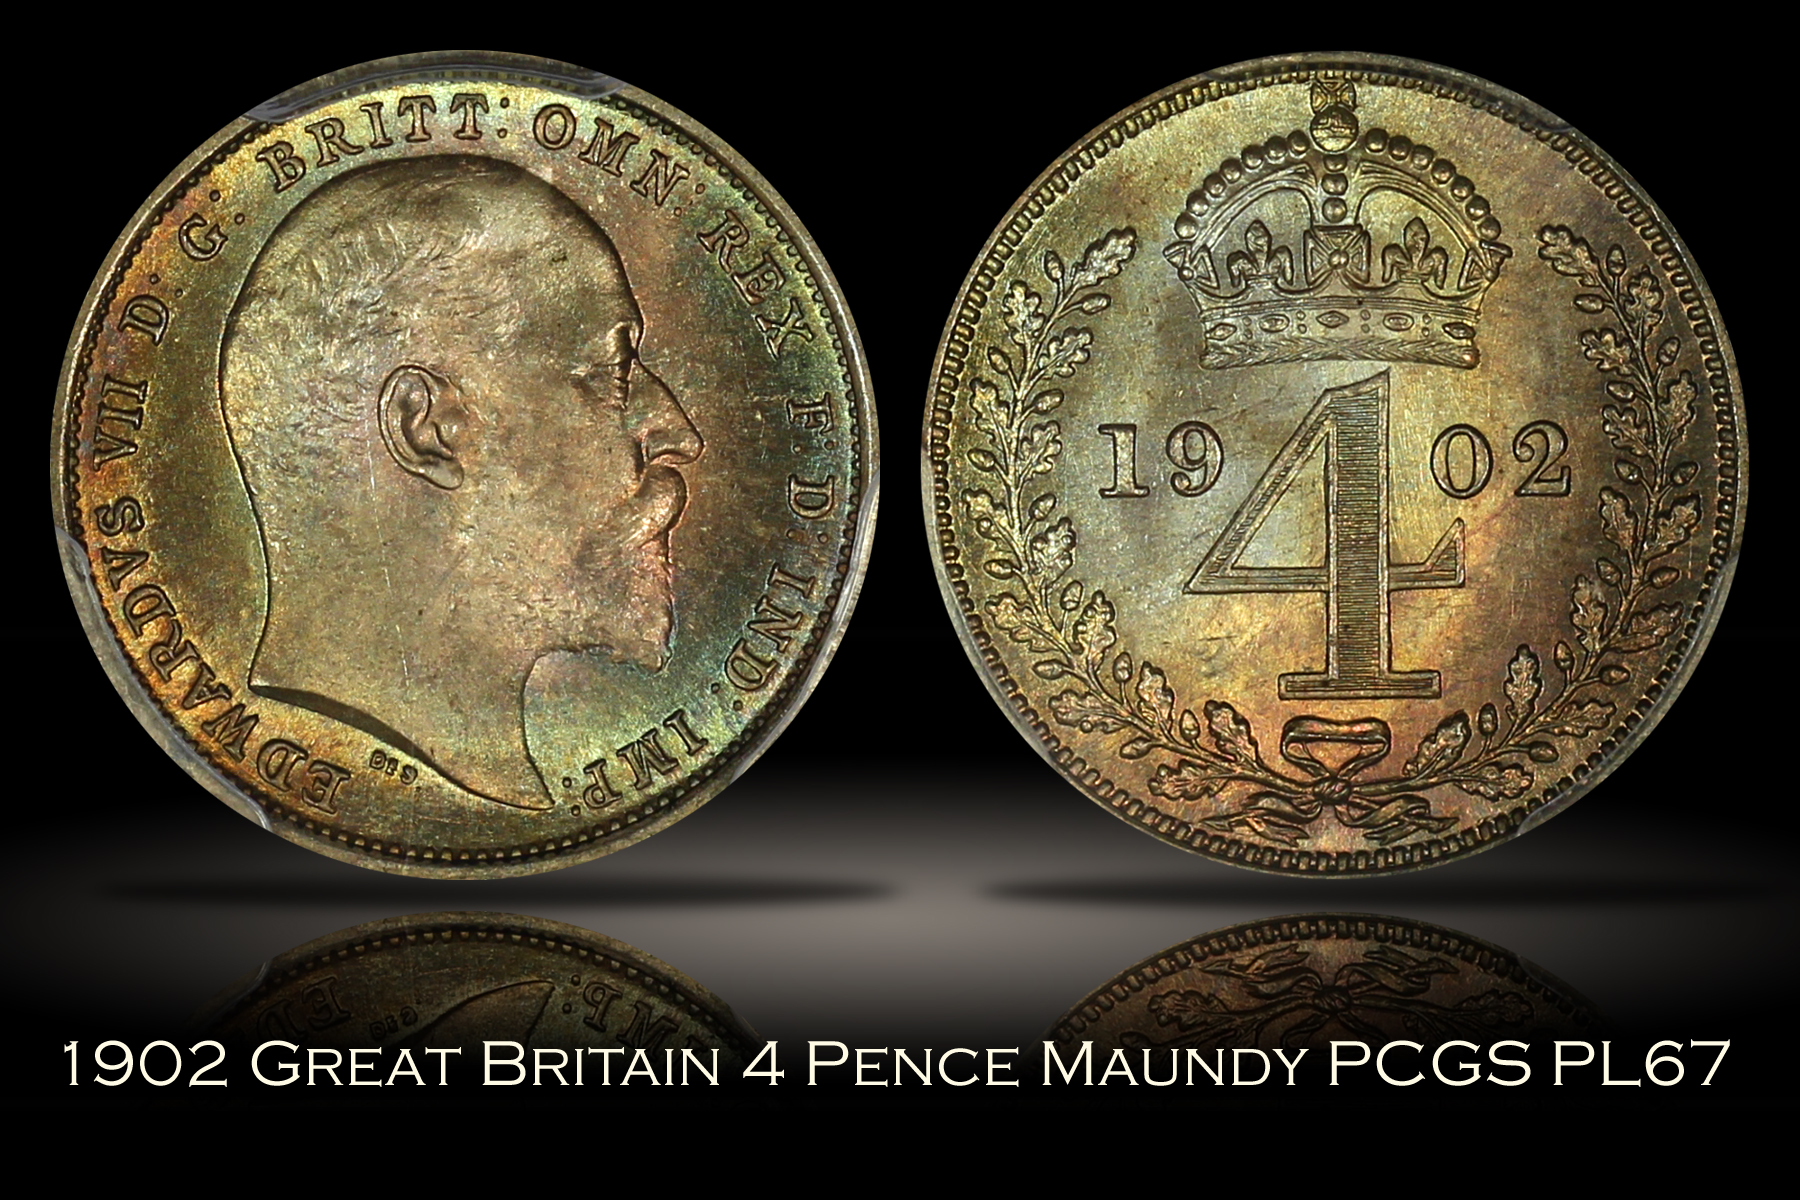 1902 Great Britain 4 Pence Maundy PCGS PL67